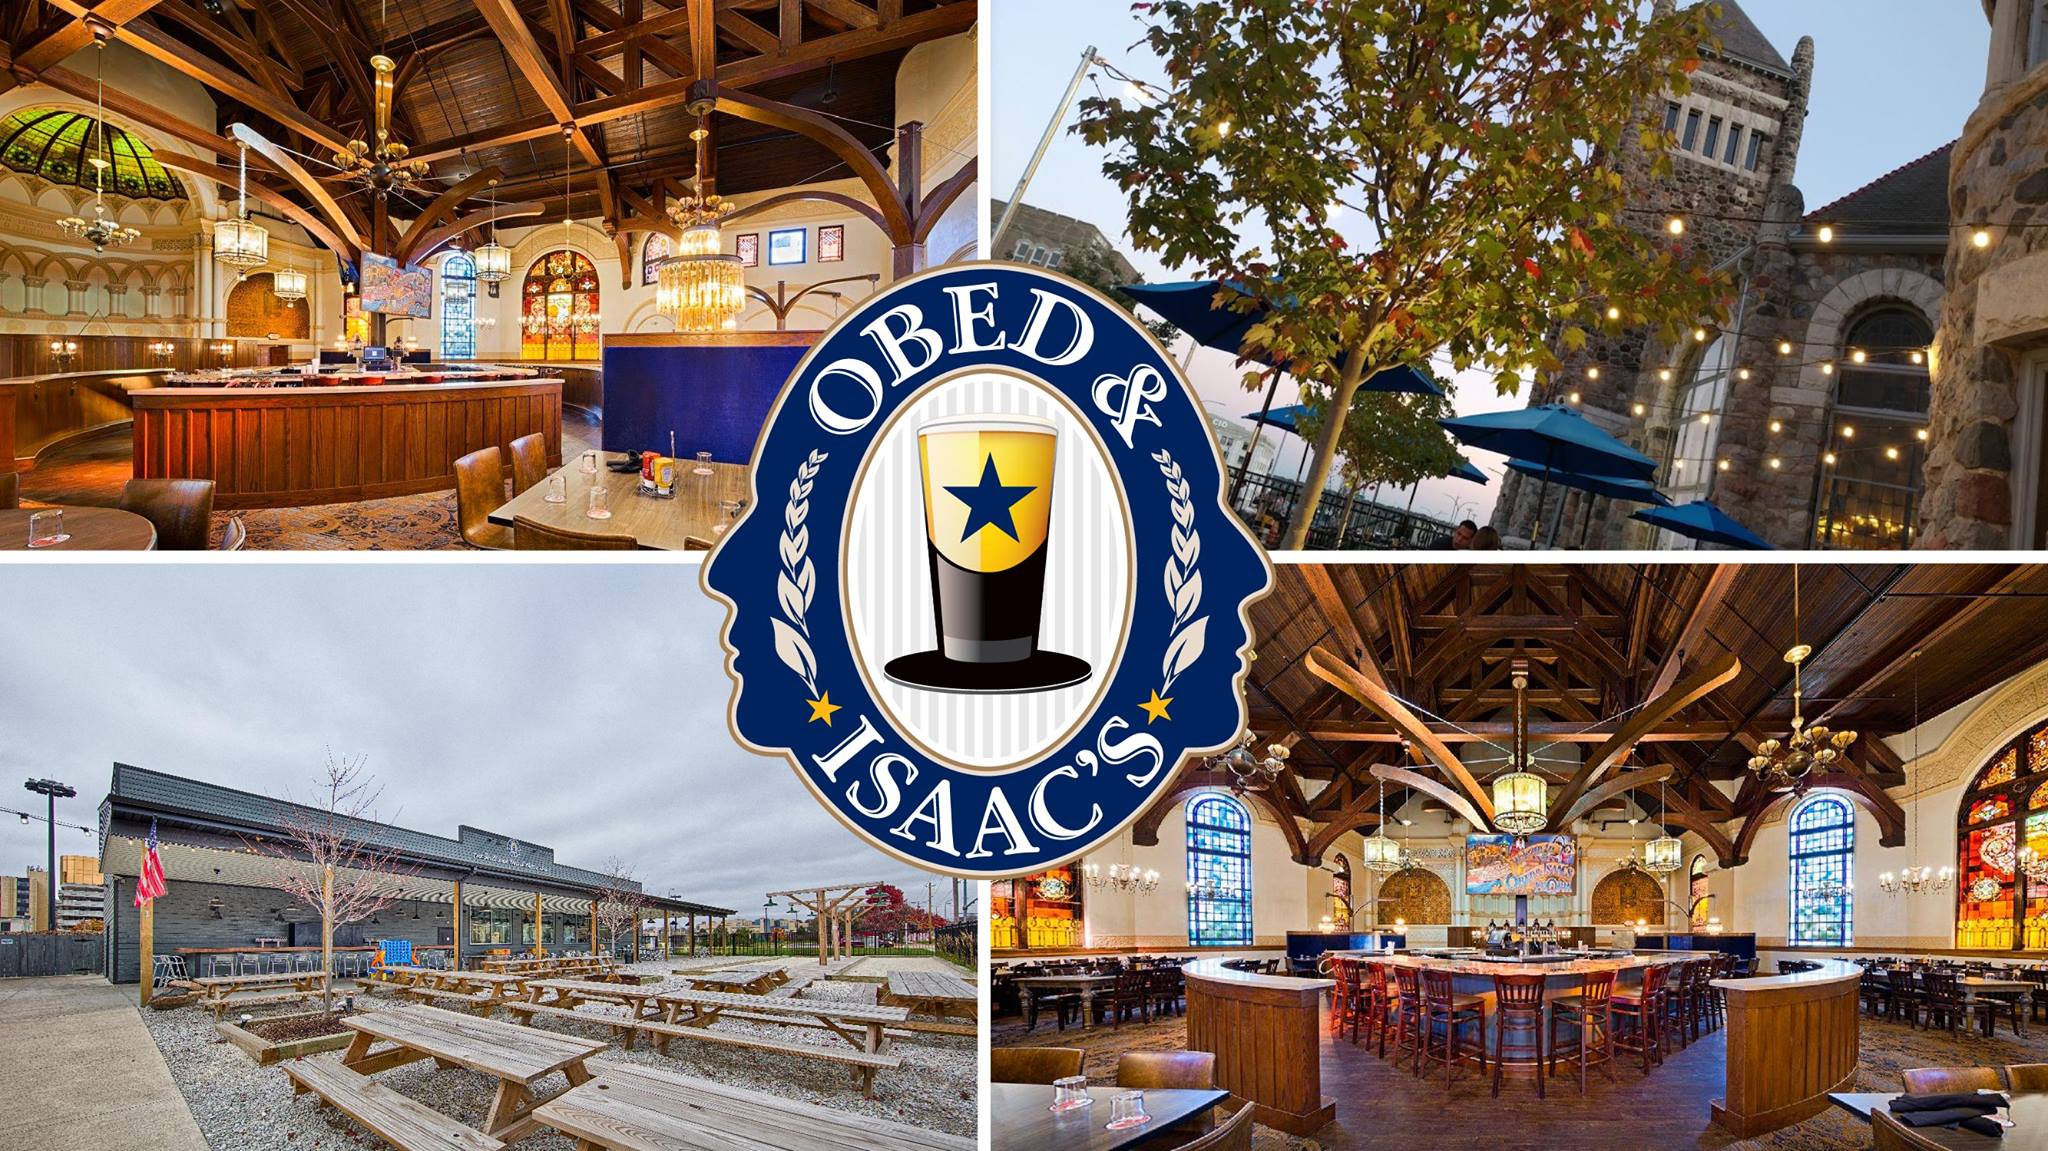 Obed & Isaac’s Microbrewery and Eatery – Peoria